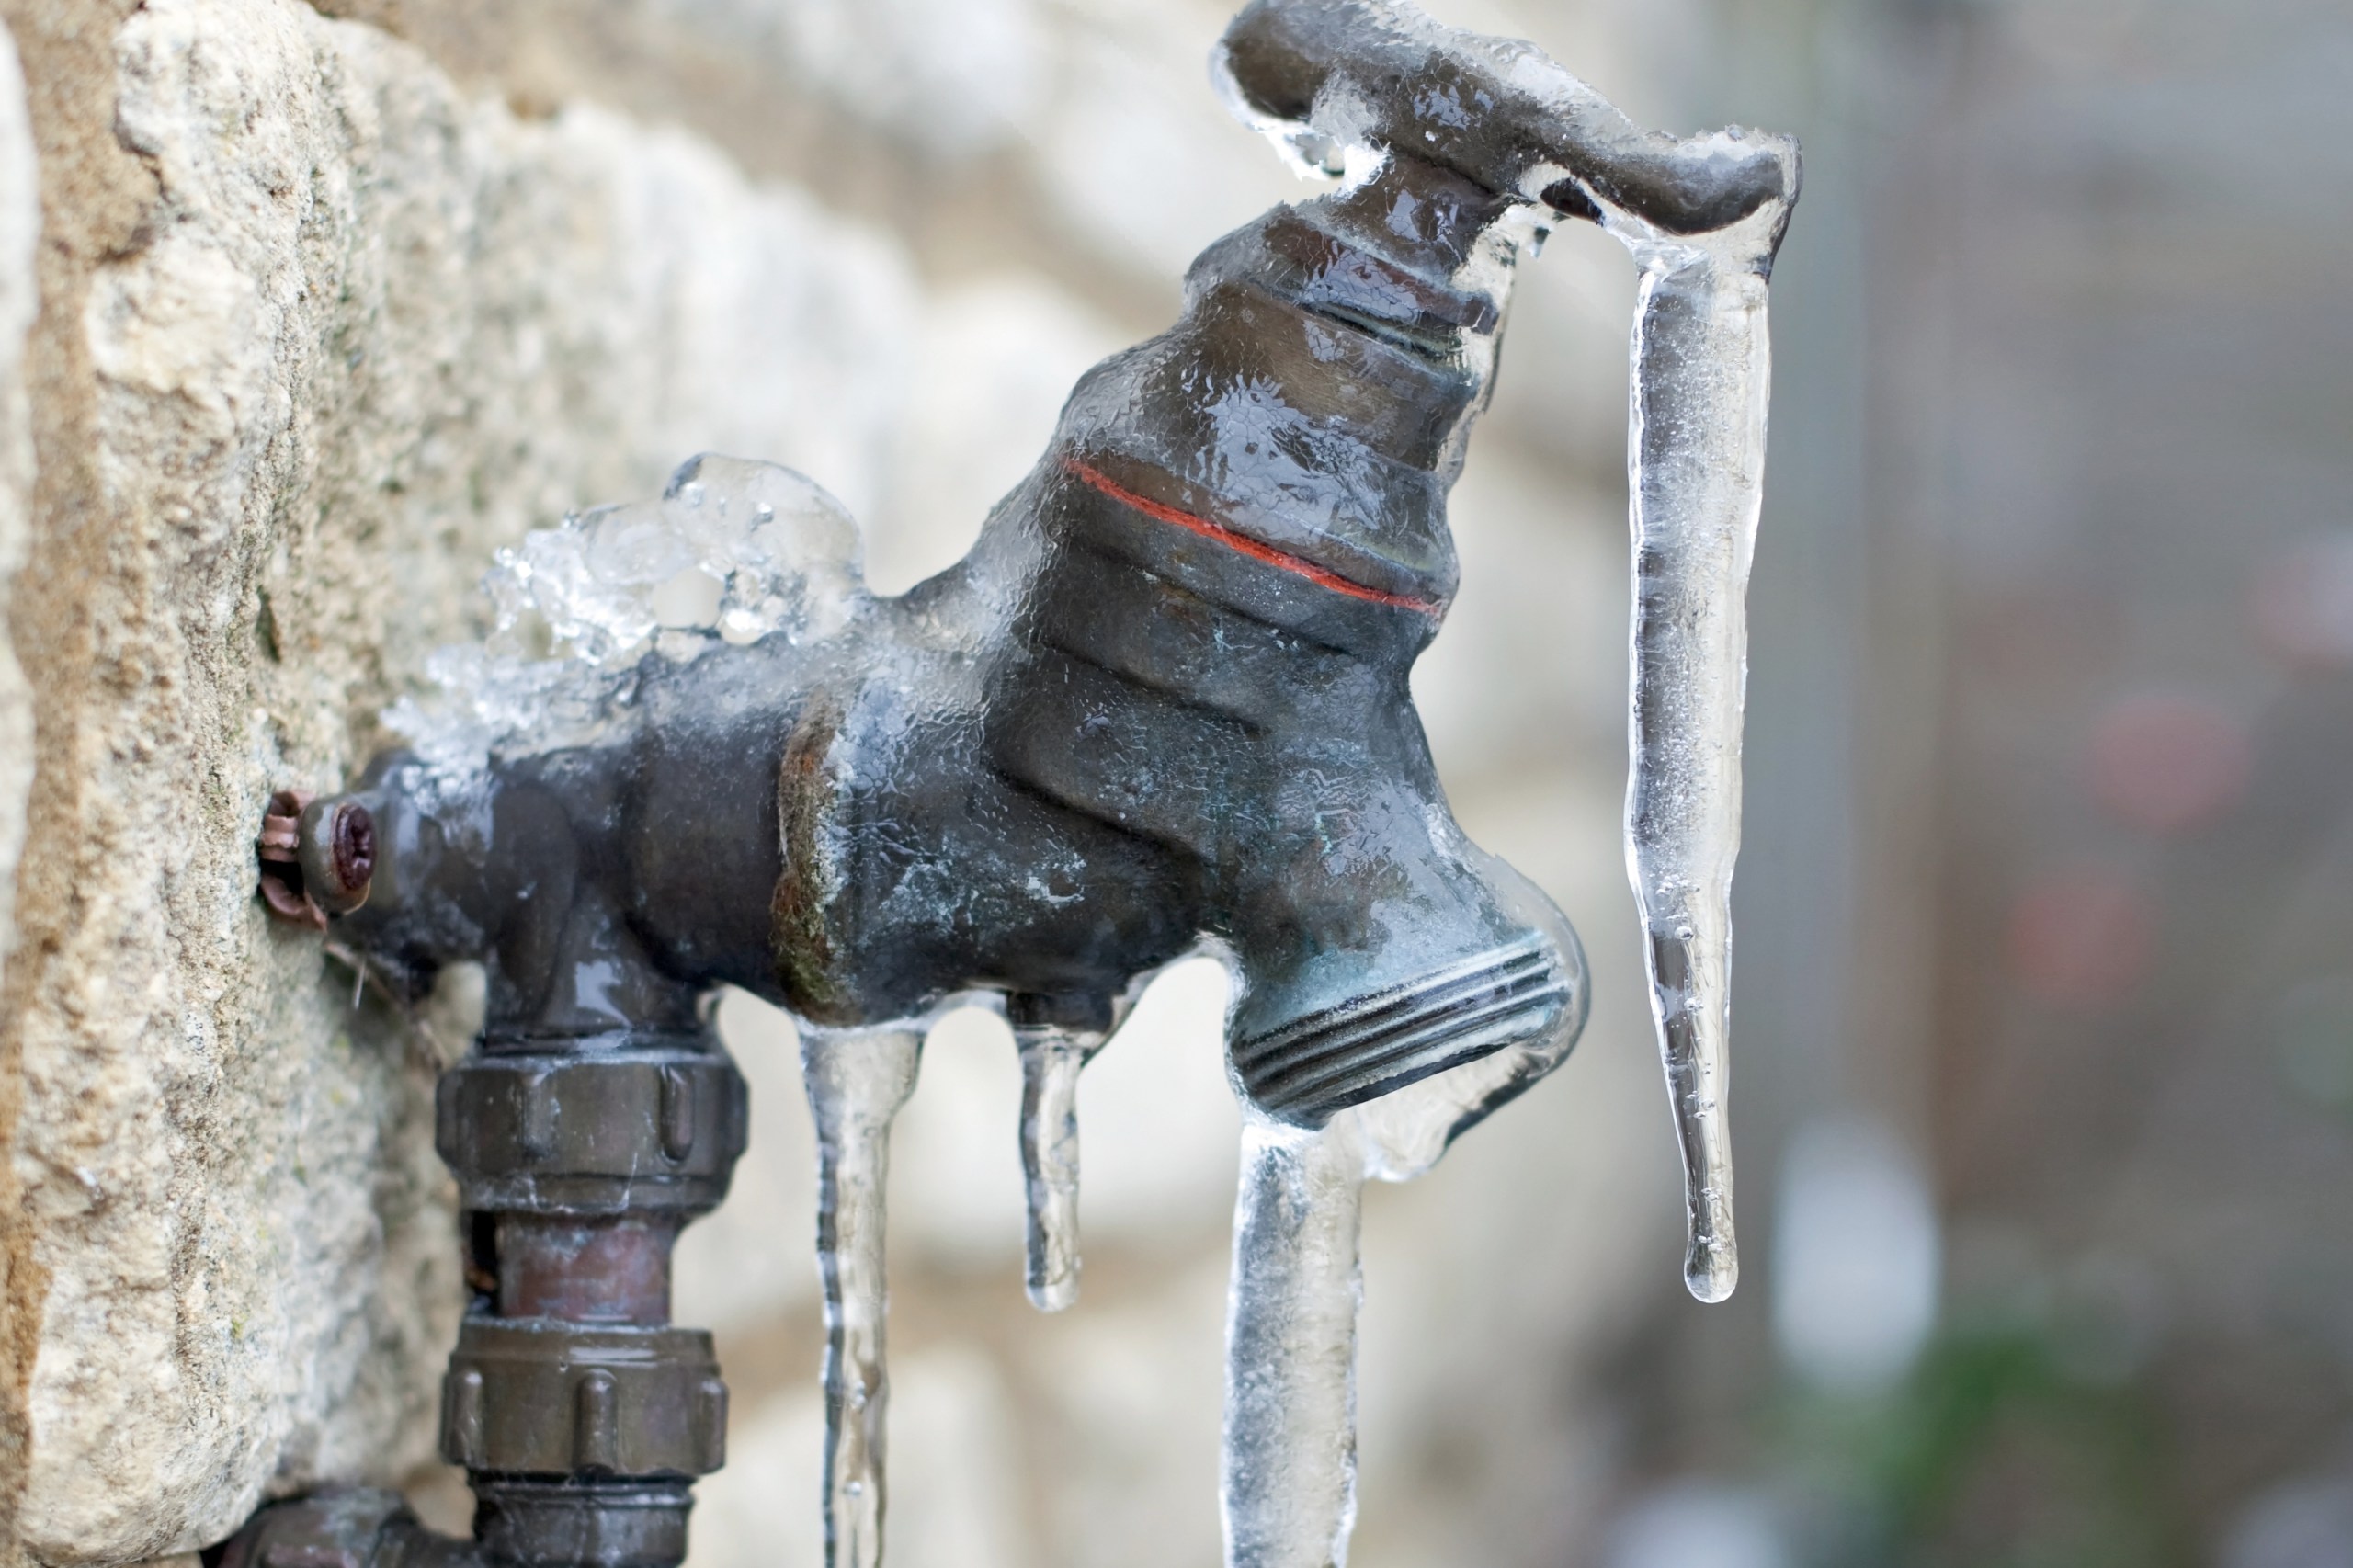 How to Keep Pipes From Freezing | Stop Pipes From Freezing